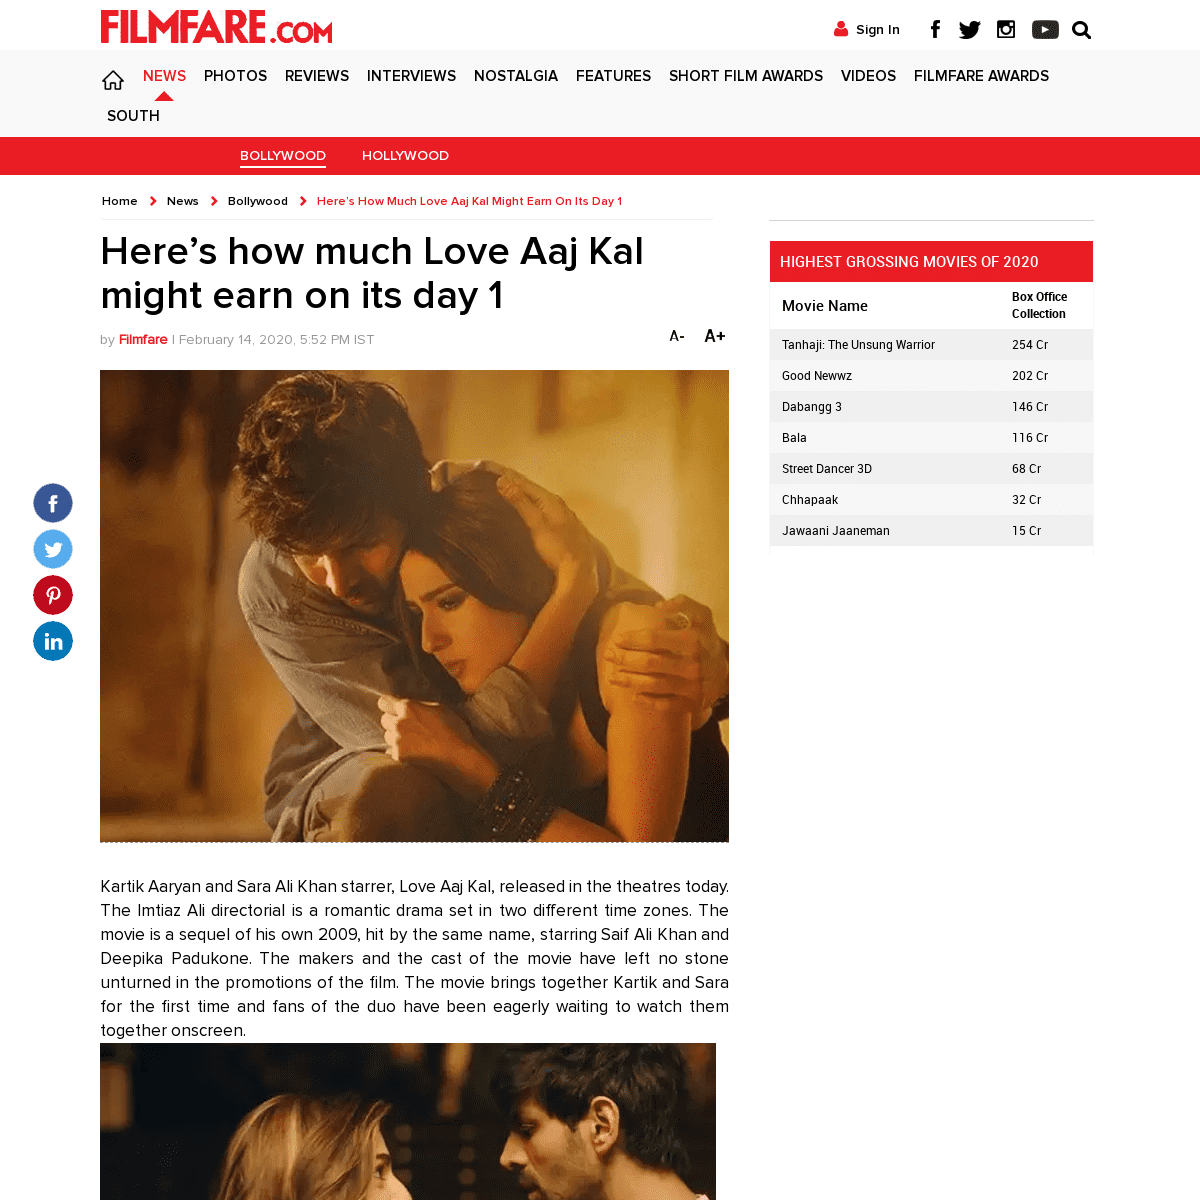 A complete backup of www.filmfare.com/news/bollywood/heres-how-much-love-aaj-kal-might-earn-on-its-day-1_-39095.html